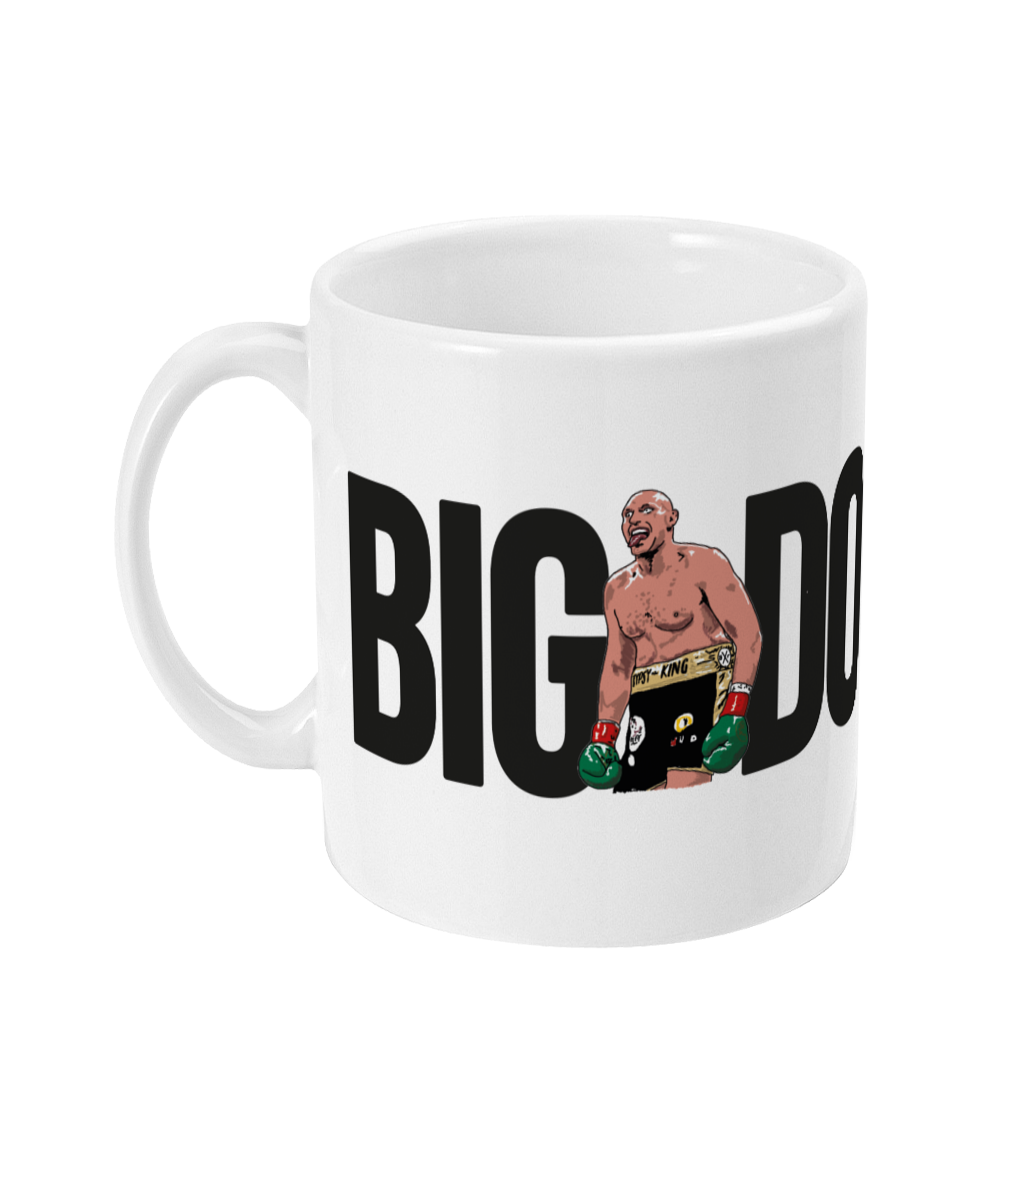 Funny Mug / cup designed to brighten up that desk or coffee table. Design features Tyson Fury & his famous catchphrase. It will make the perfect gift for a boxing fan whether it's for a birthday, Christmas or any other special occasion. 